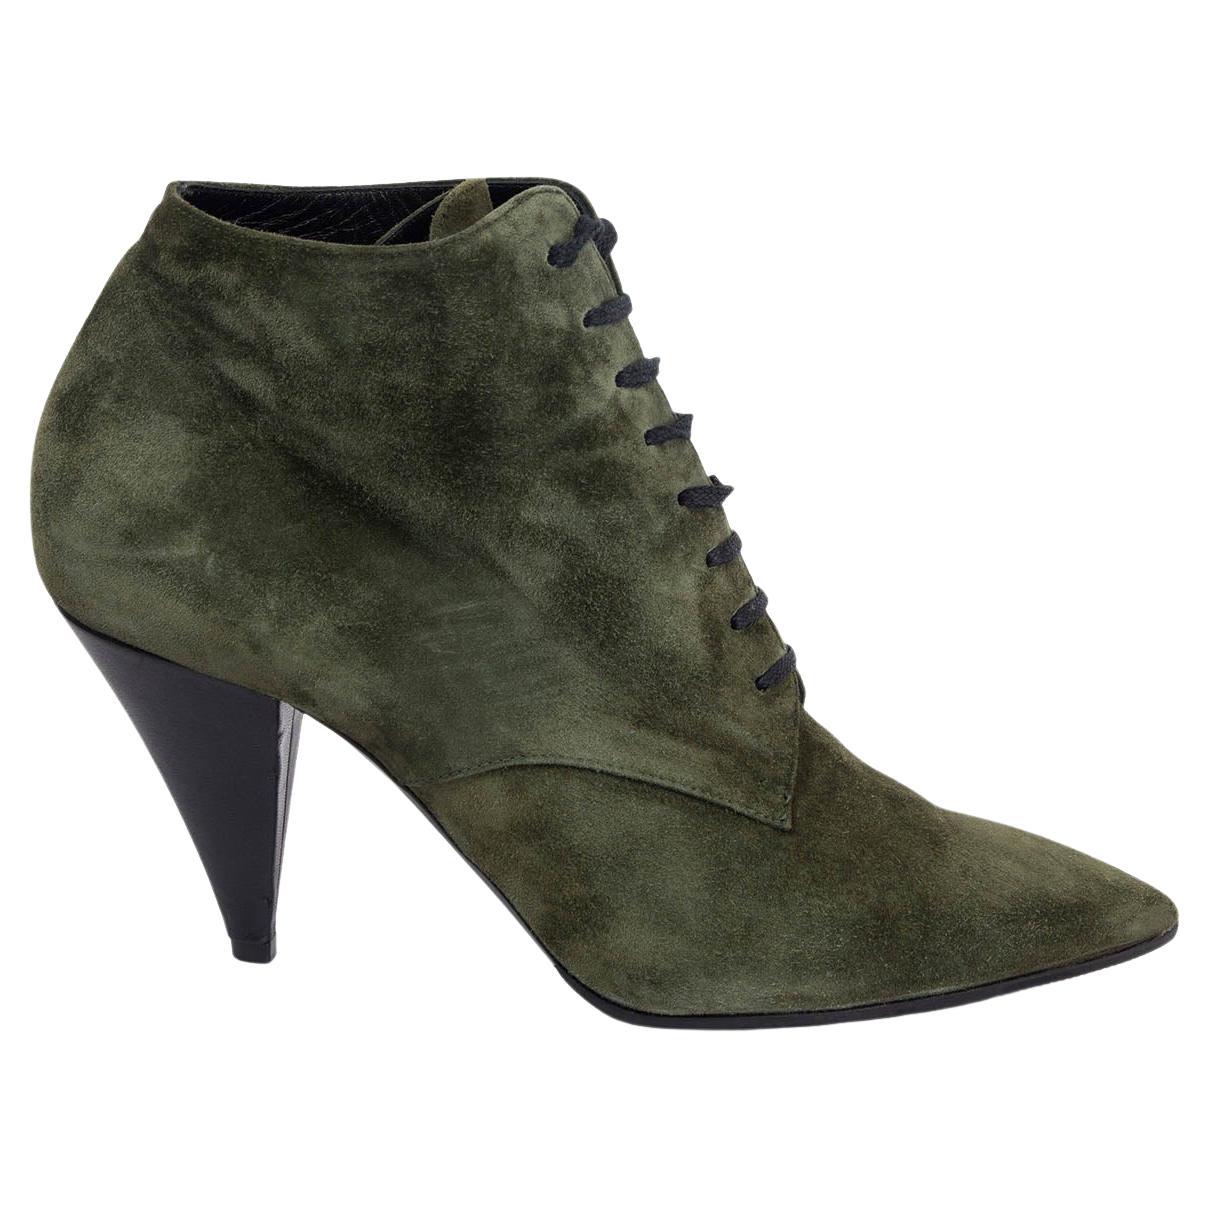 SAINT LAURENT military green suede ERA 85 Ankle Boots Shoes 39.5 For Sale